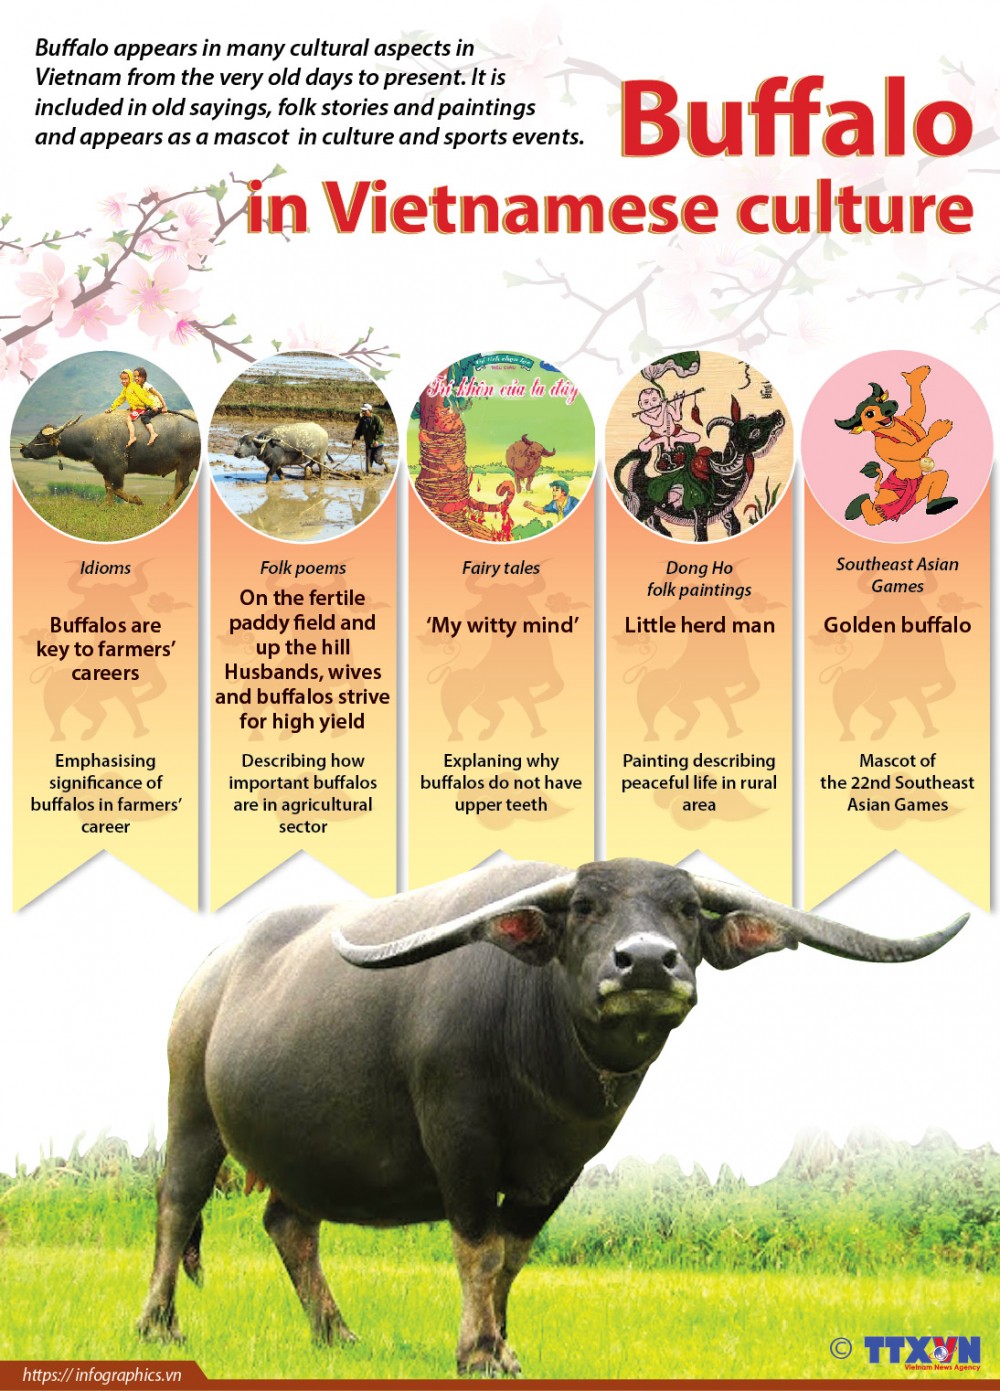 Buffalo in Vietnamese culture: From old sayings to a mascot in culture and sports events